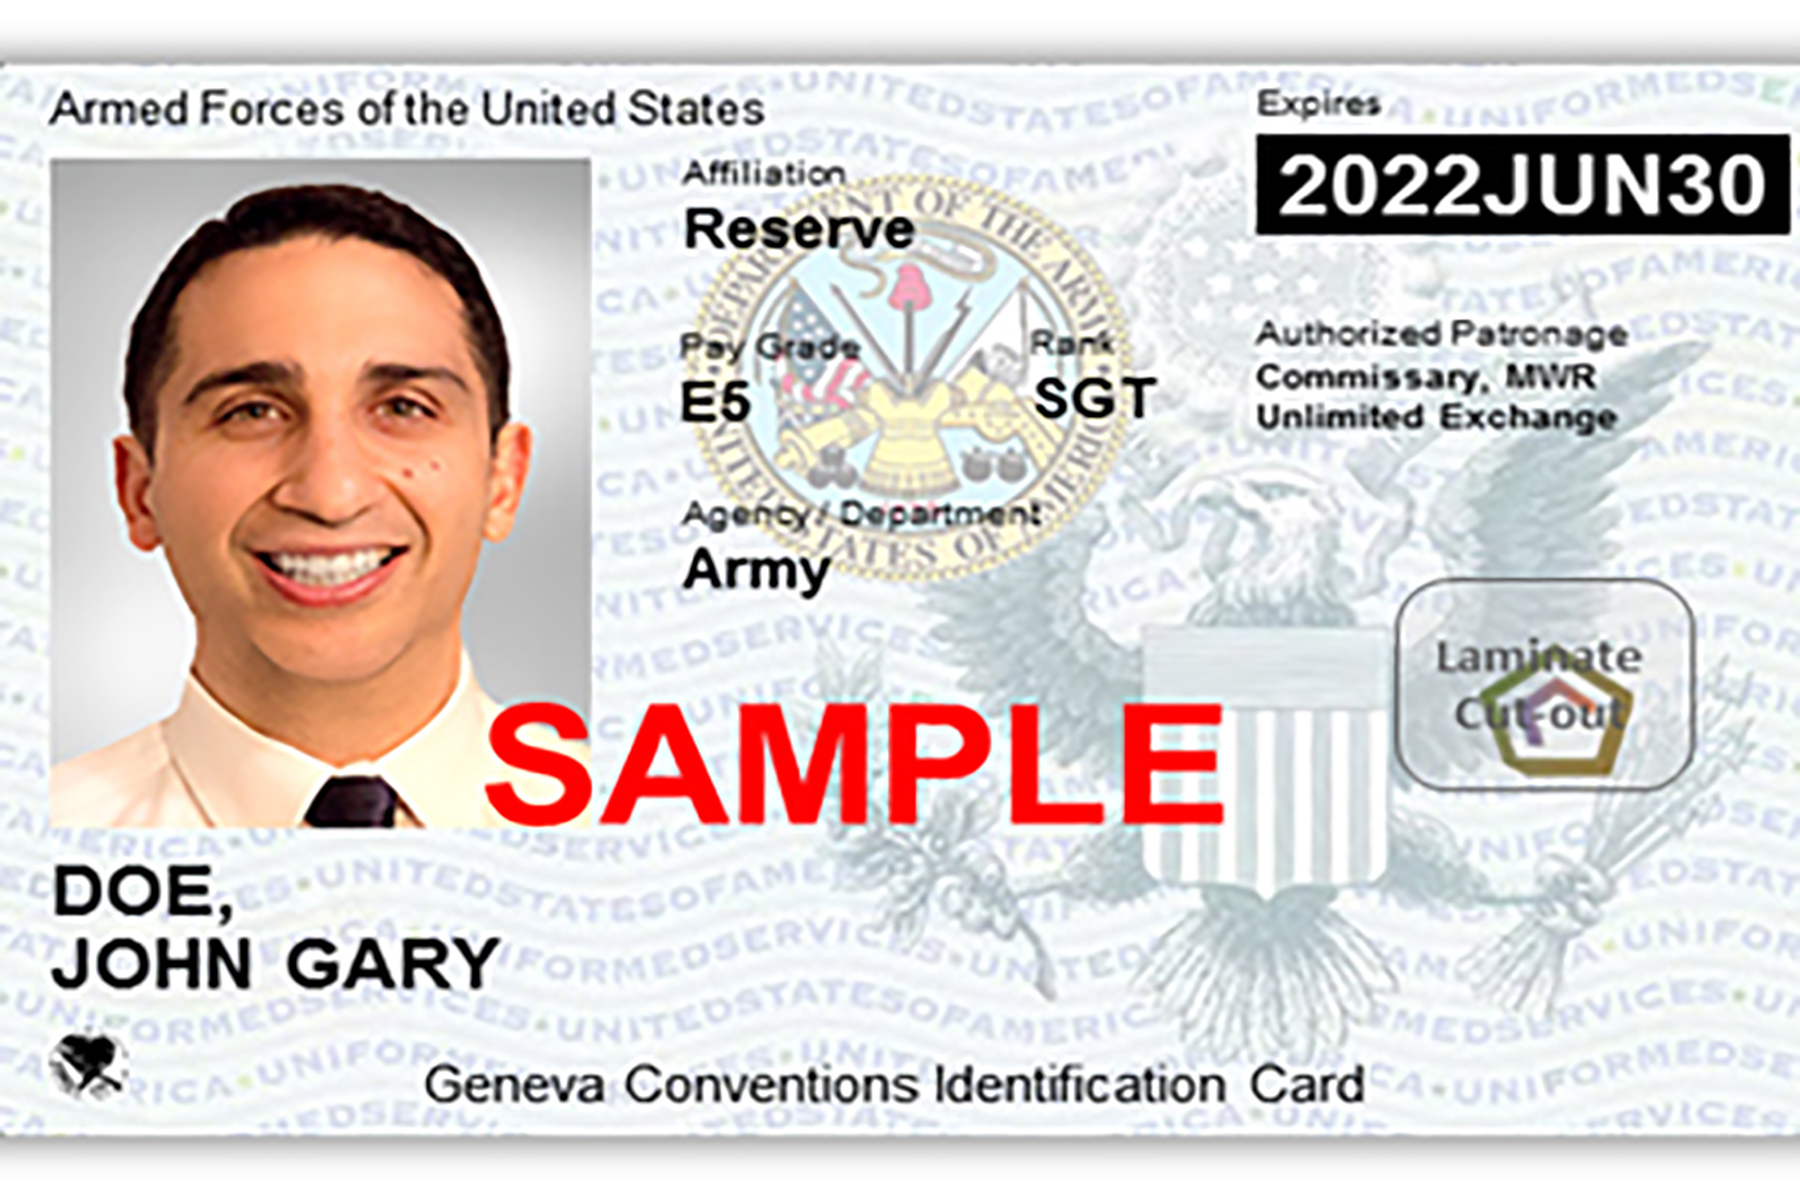 New ID cards being issued for military family members, retirees